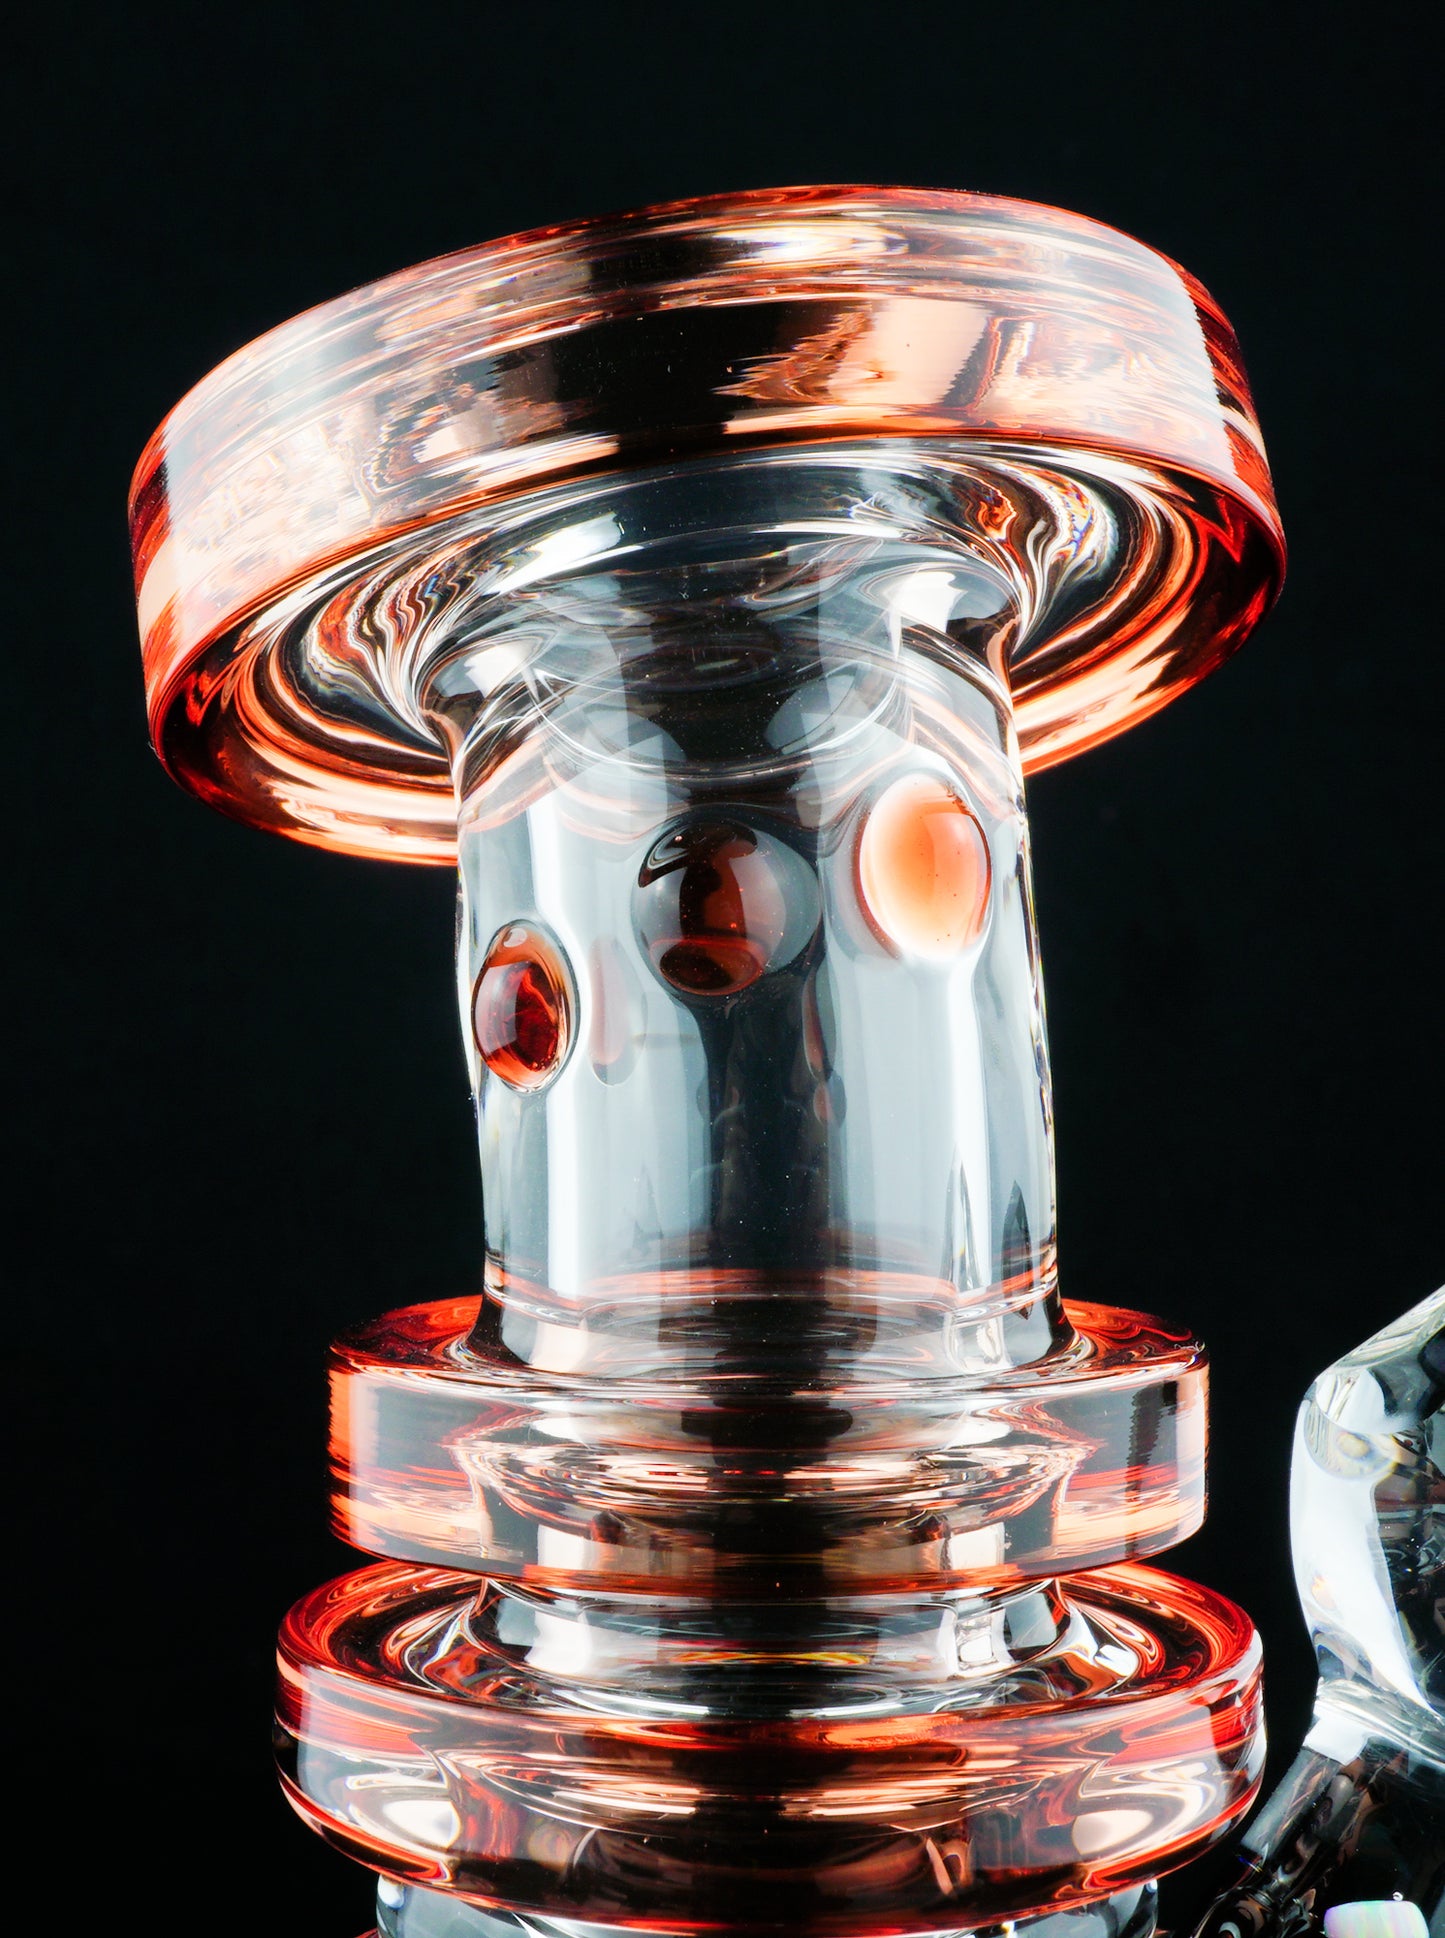 Pomegranate Mini Tube with Faceted Accent